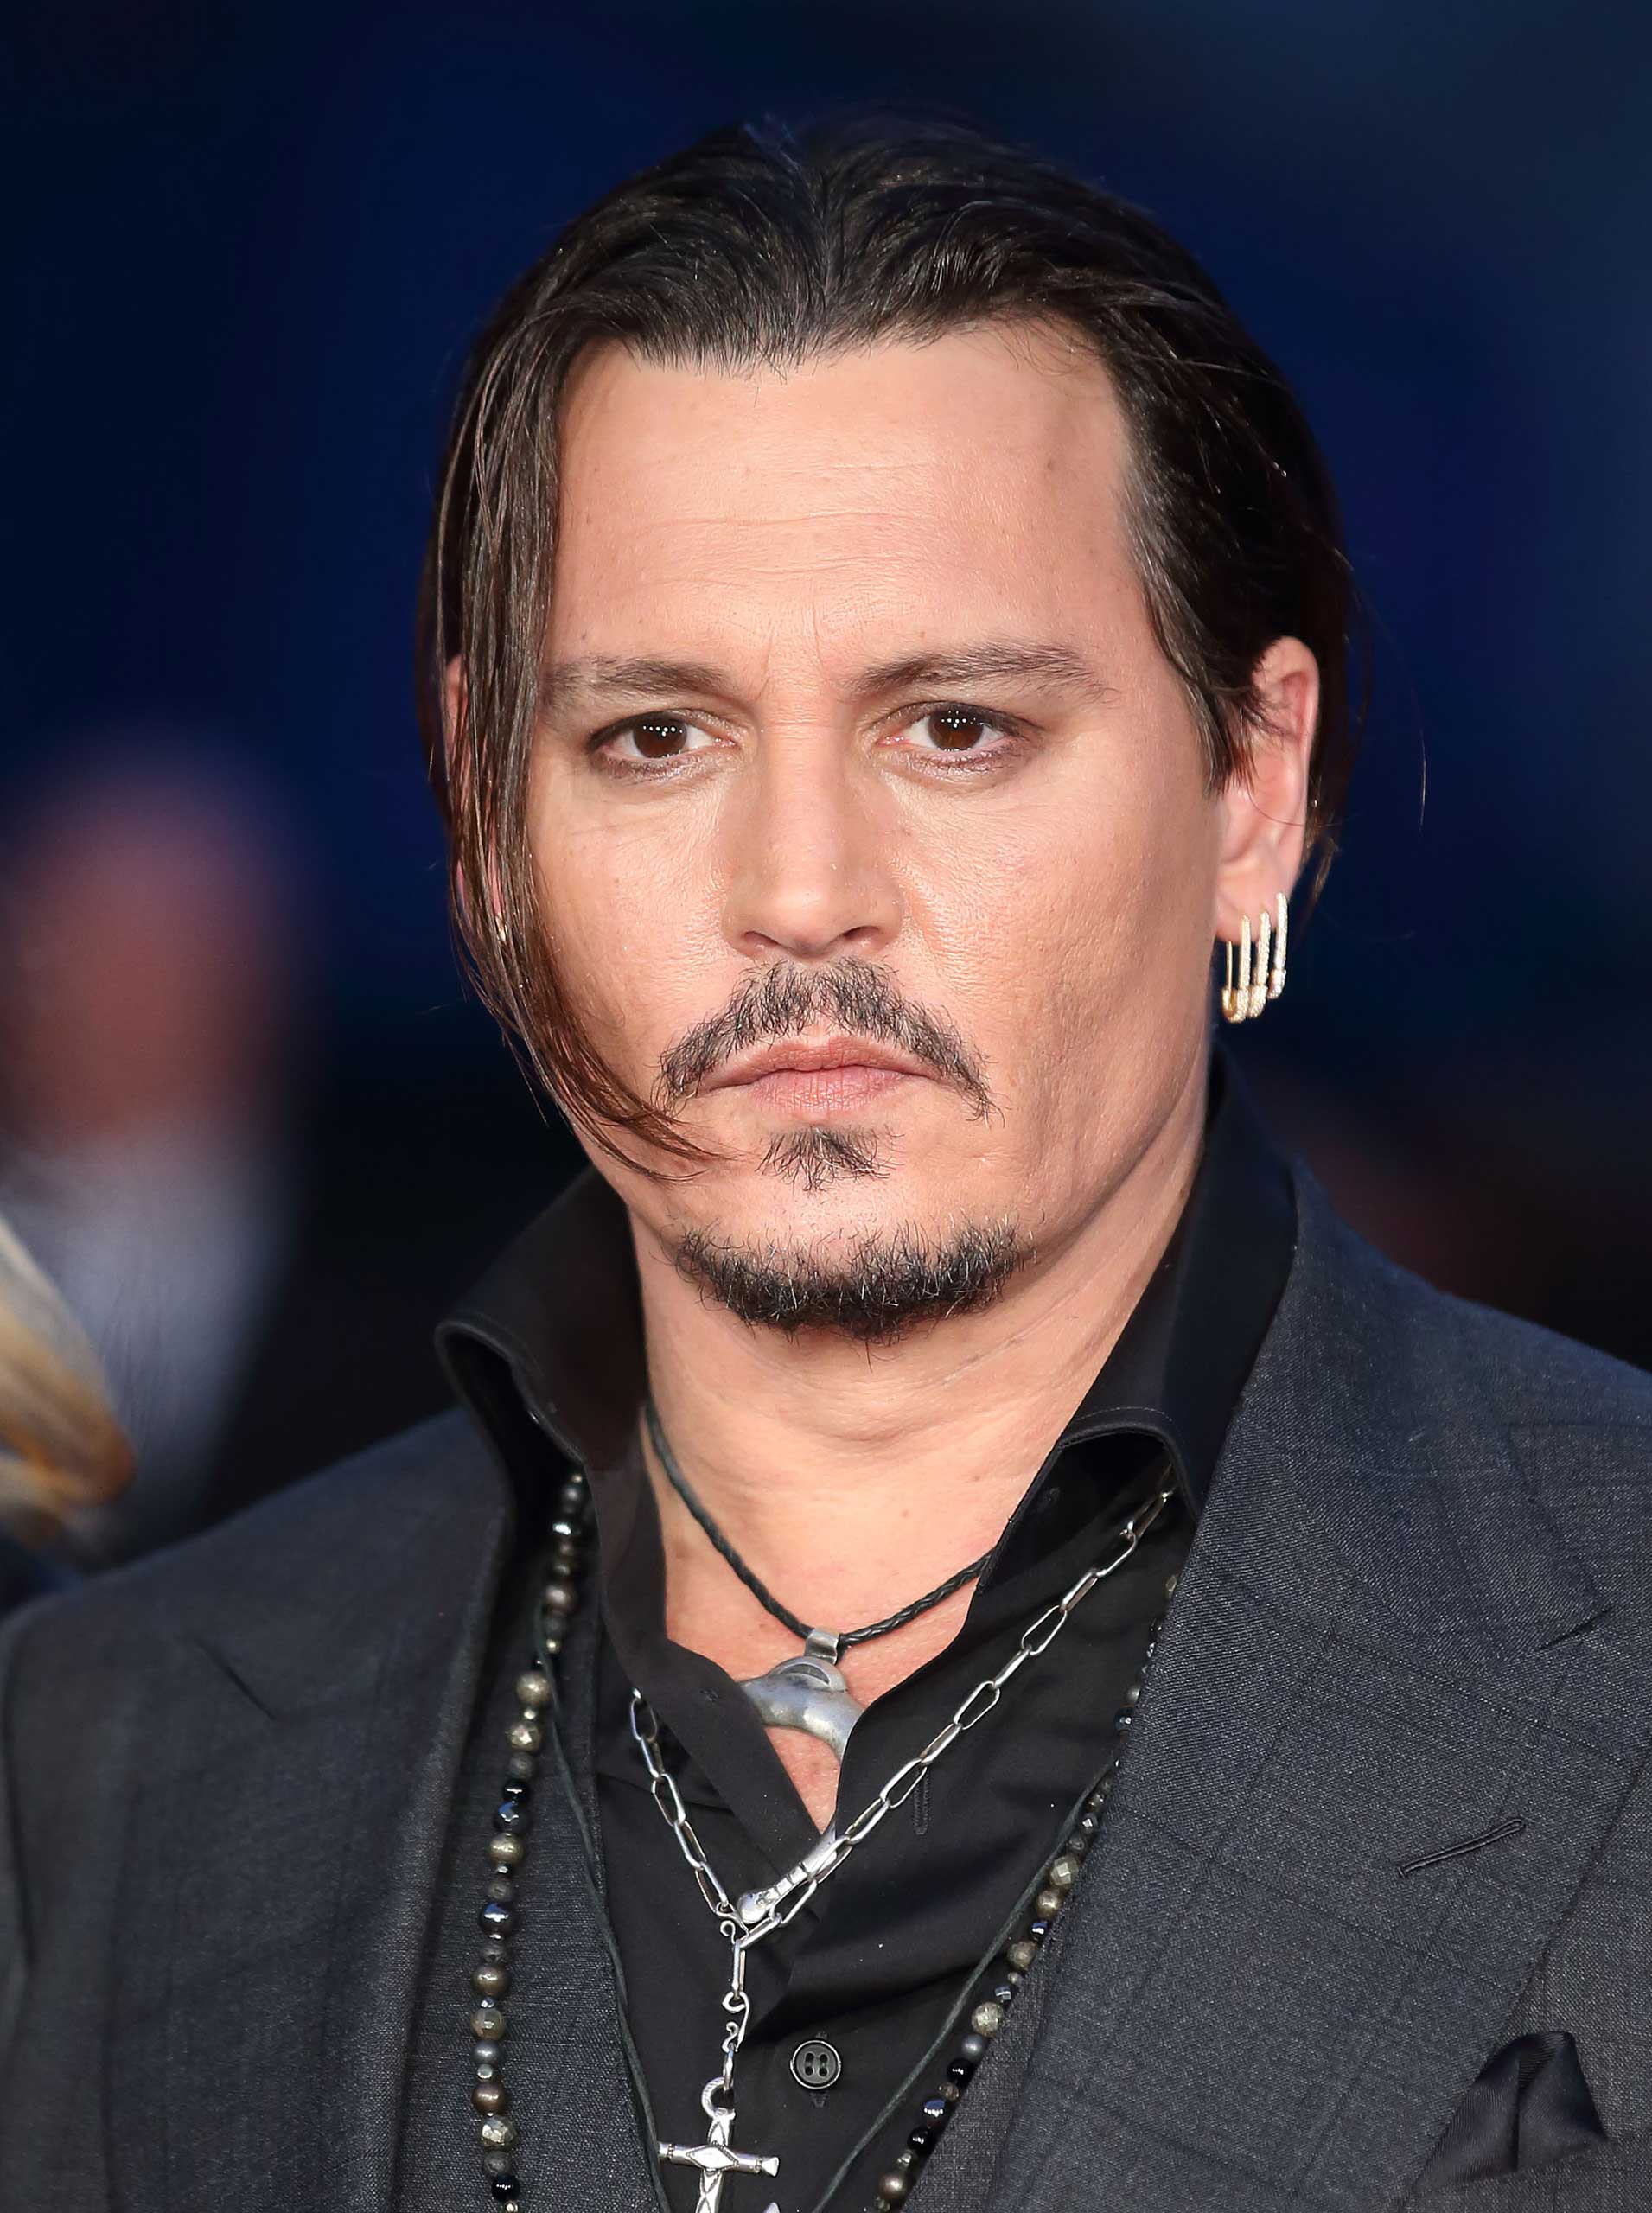 Johnny Depp attends a screening of "Black Mass" during the BFI London Film Festival at Odeon Leicester Square in London, on Oct. 11, 2015. (Mike Marsland—Getty Images)